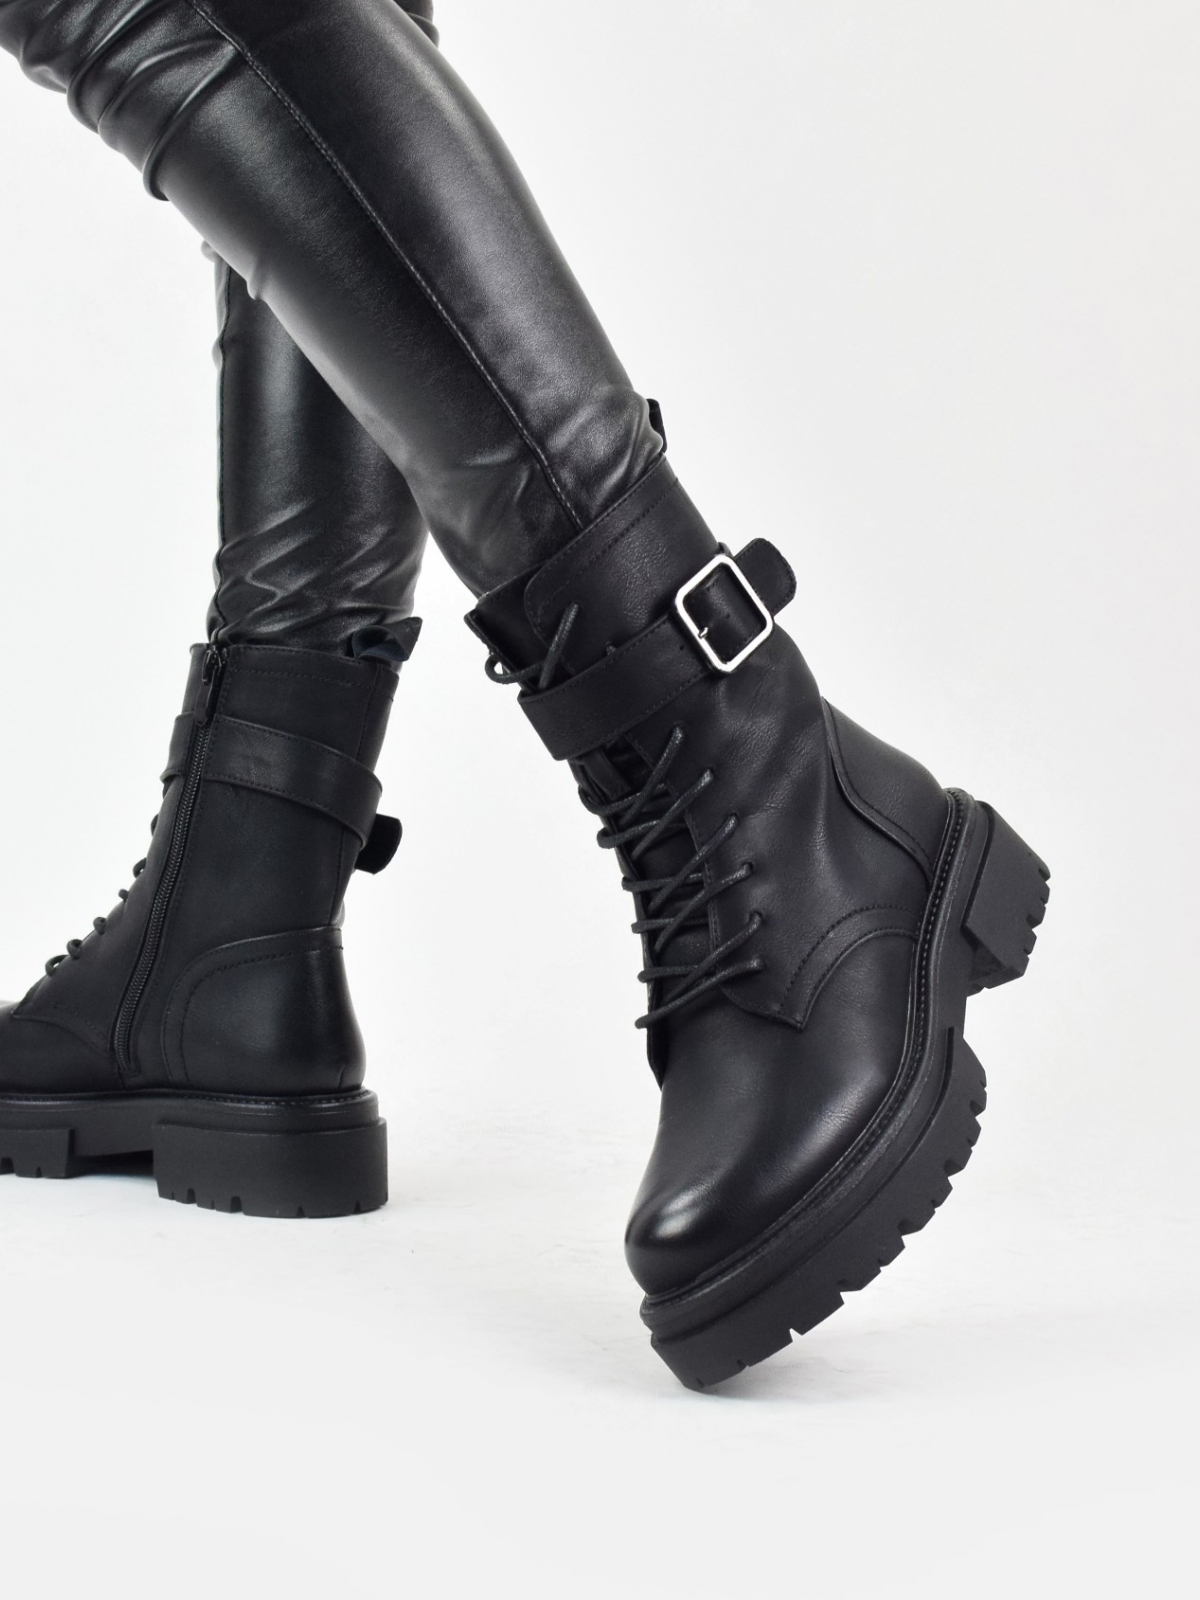 Lace up ankle boots with zipper inside in black